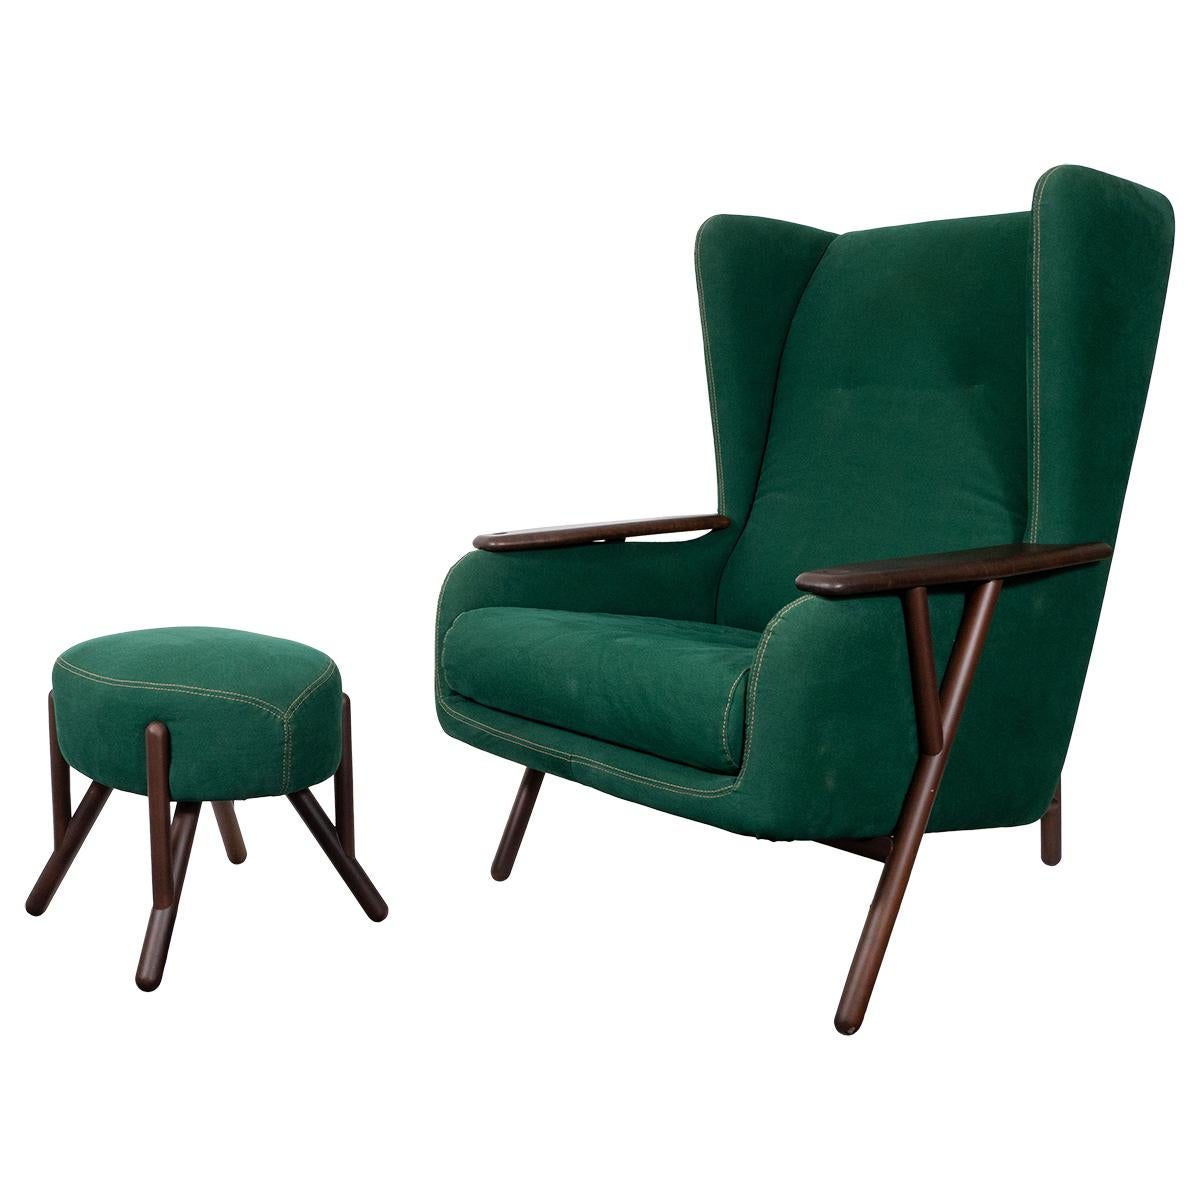 Green upholstered wingback chair with exotic wood frame and matching ottoman by Paolo Alvez in the style of Lina Bo Bardi.

Ottoman measures 20